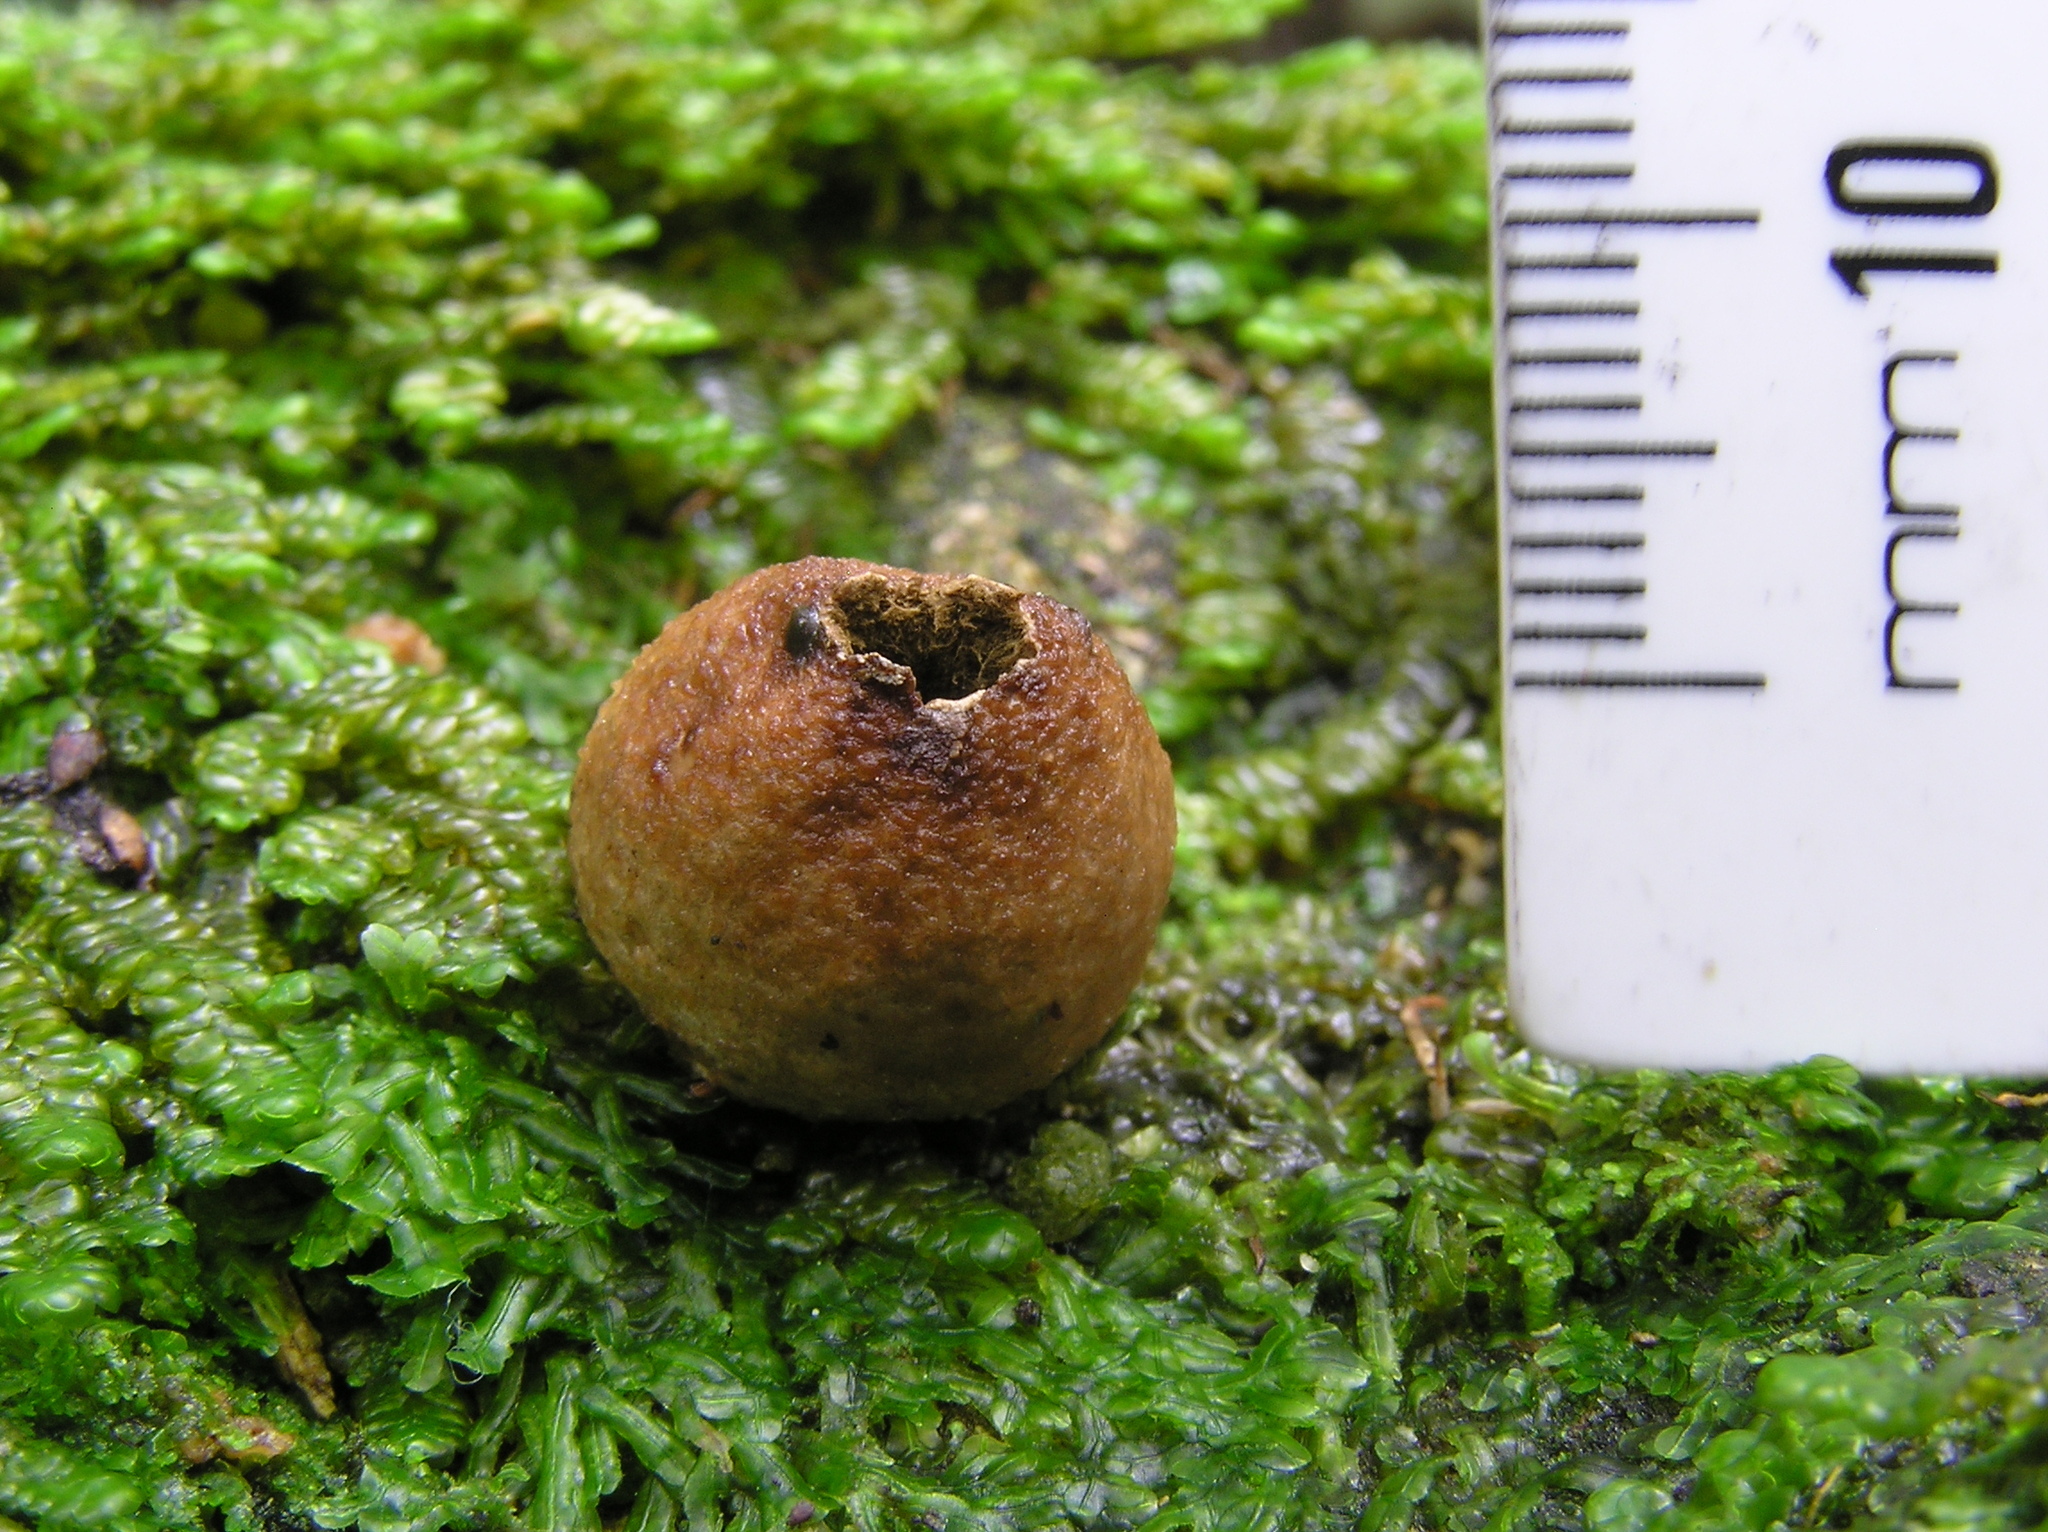 Puffball with scale